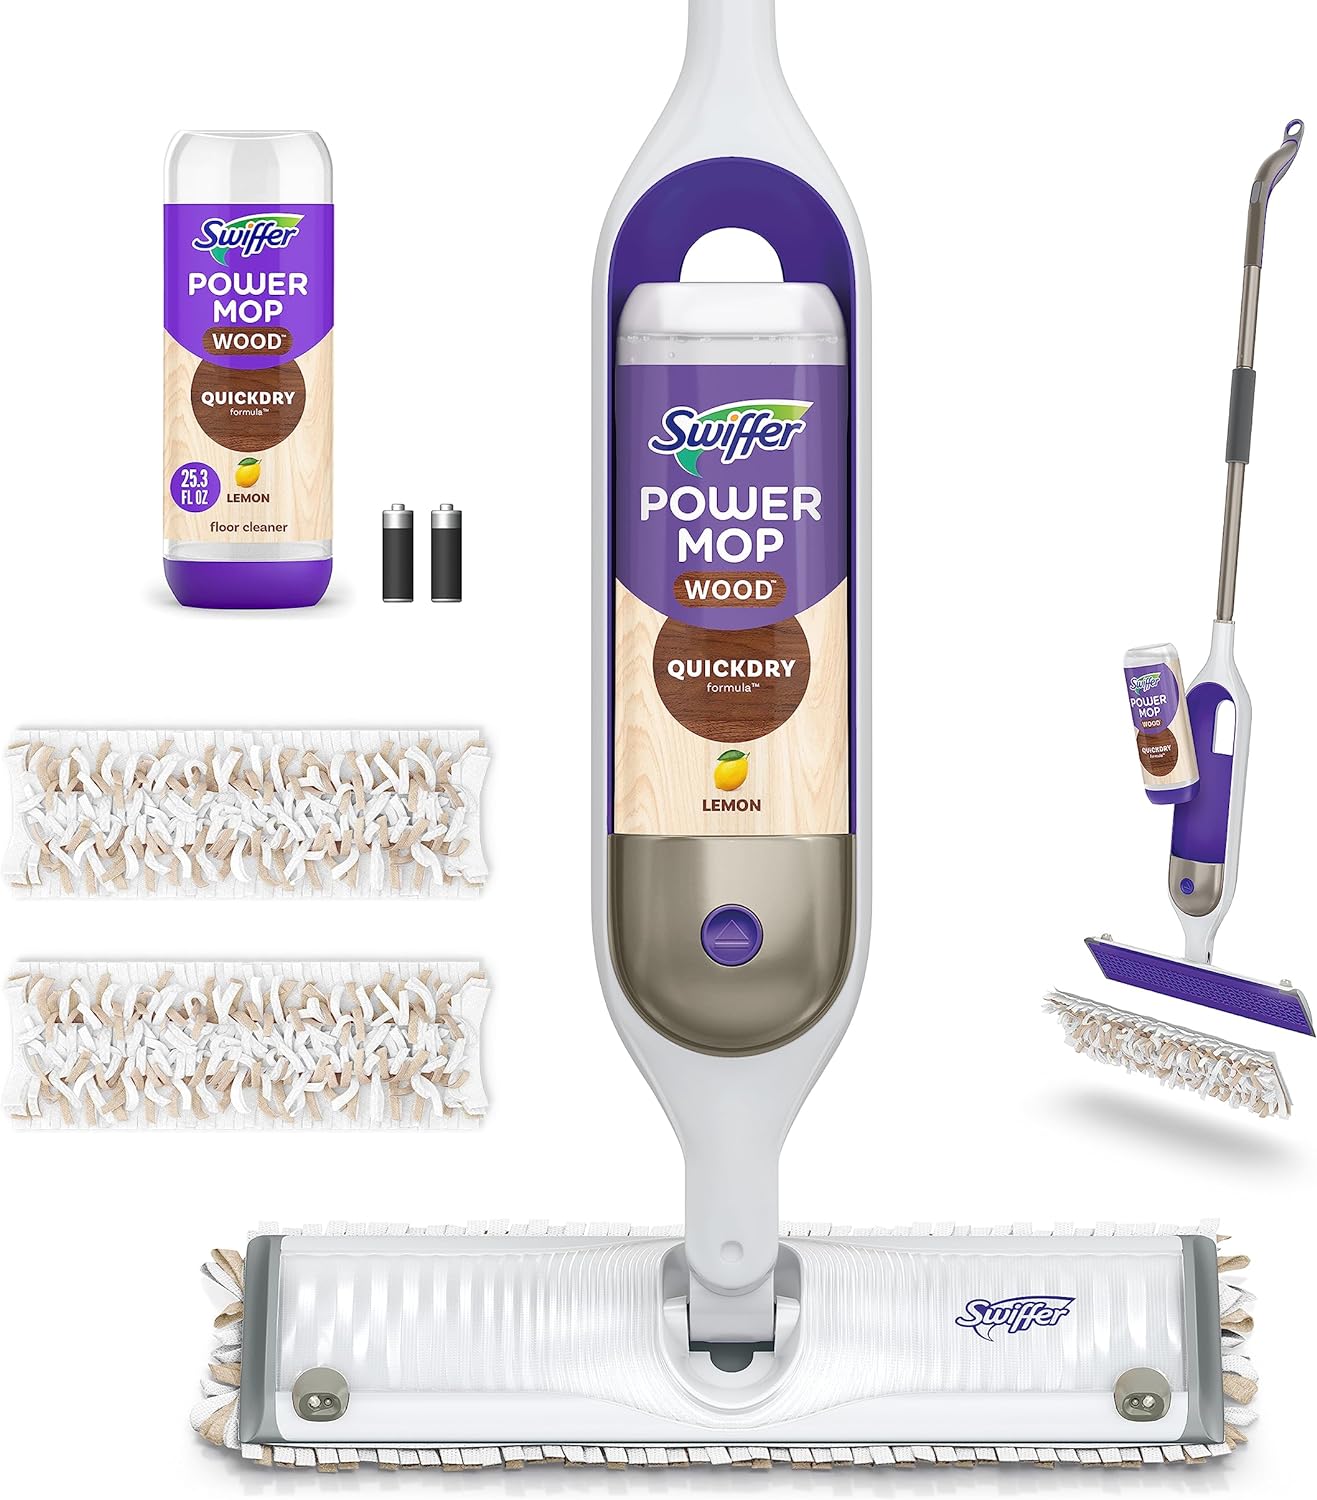 Purchased this to replace the family mop so I could clean my room because I have cats in my room. They normally leave the litter splashed everywhere, so I needed something that was going to not only sweep up the litter but also mop and clean my floor. I have the wood looking floor planks so I thought it was best to get a power mop for wood. So the first time I cleaned my floor the pad was a little dirty but not as bad as I expected, so I guess my mop was doing it's job! But I'm hoping this will